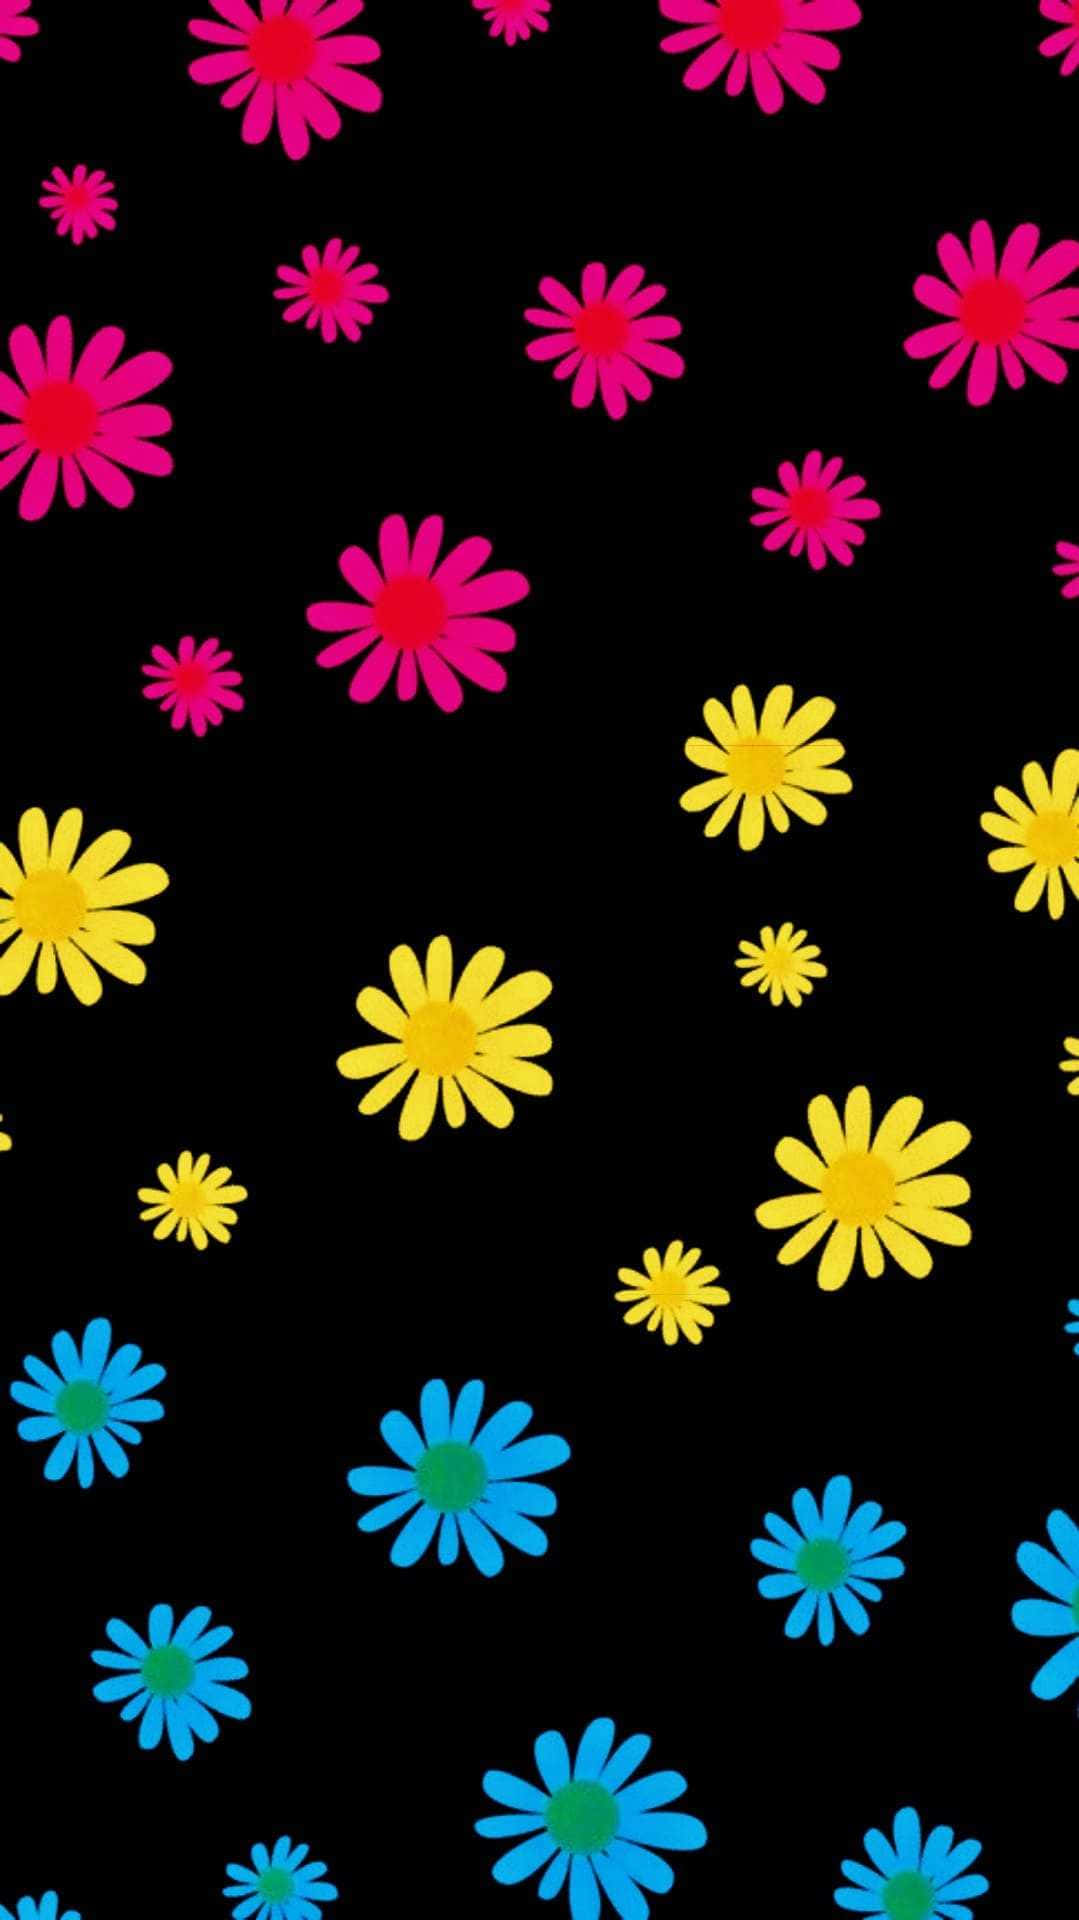 A Colorful Flower Pattern On A Black Background